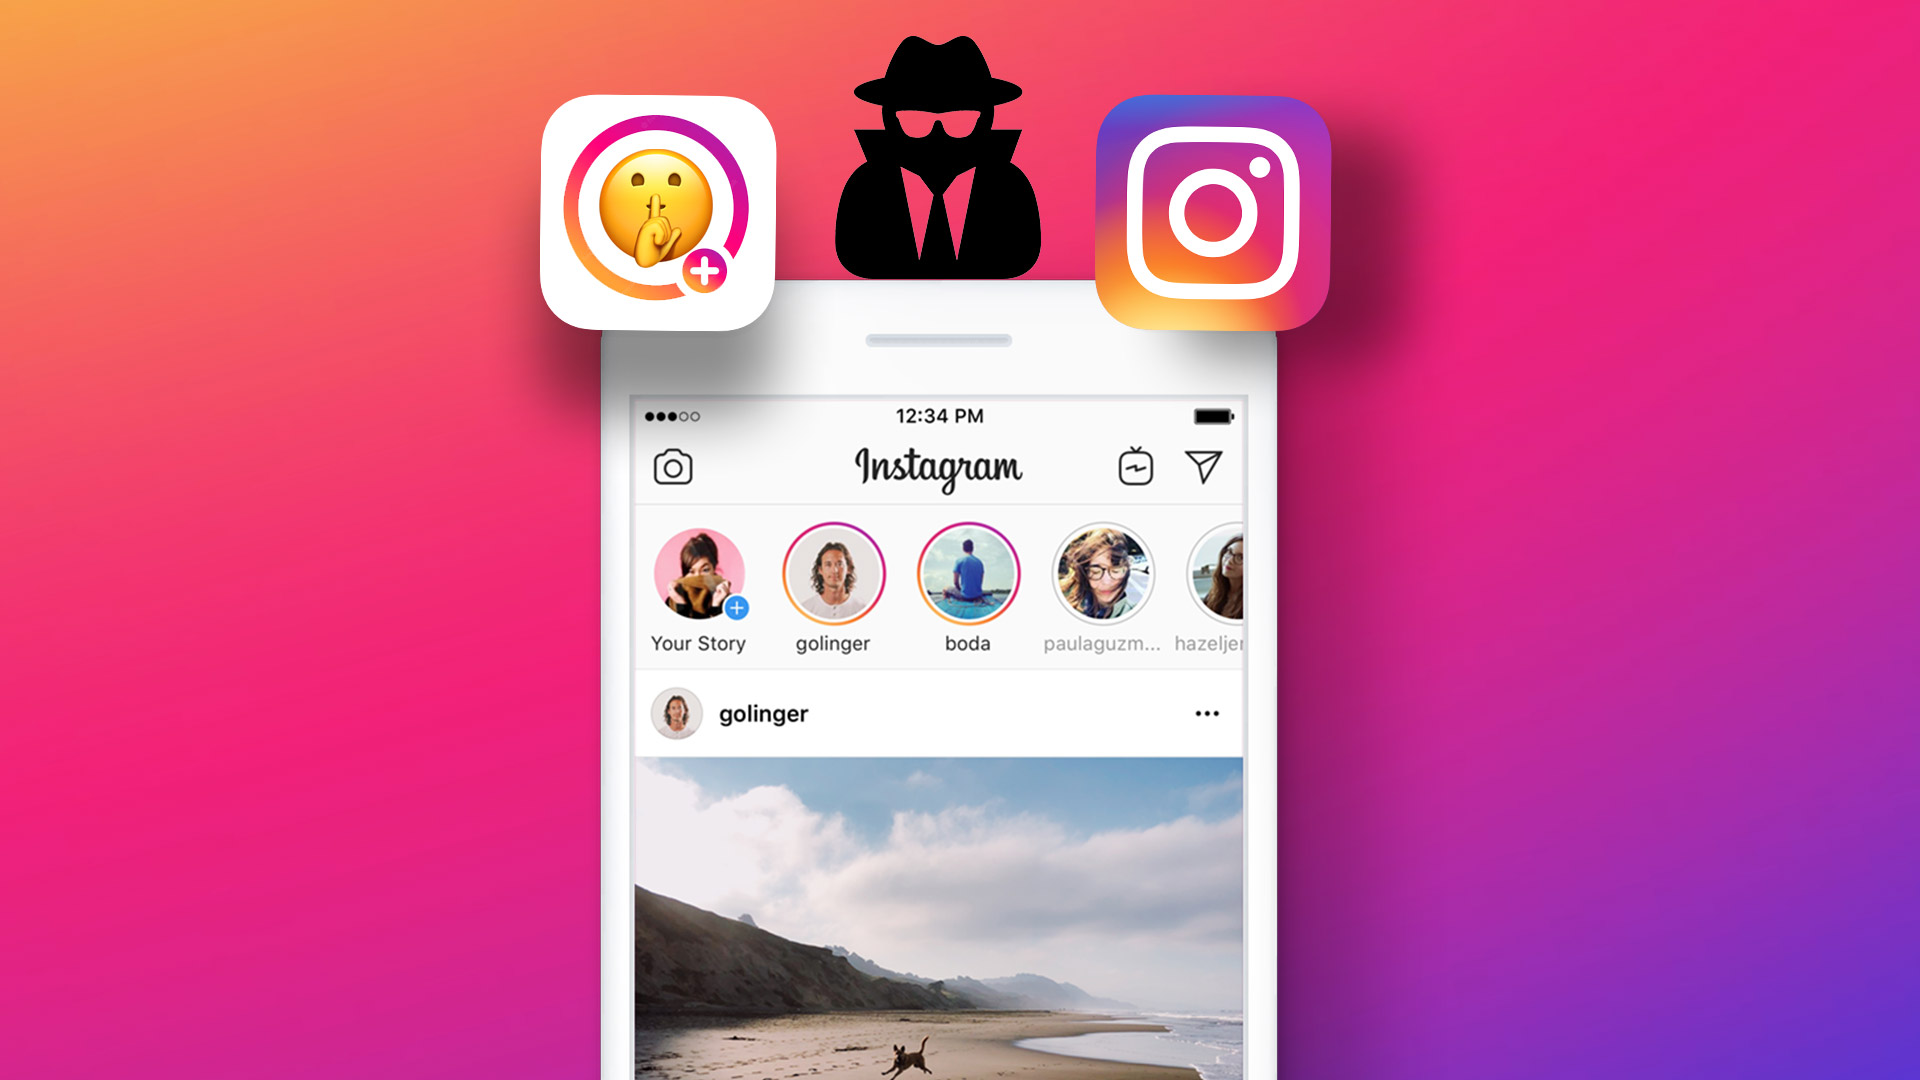 View Instagram Posts and Stories Without an Account